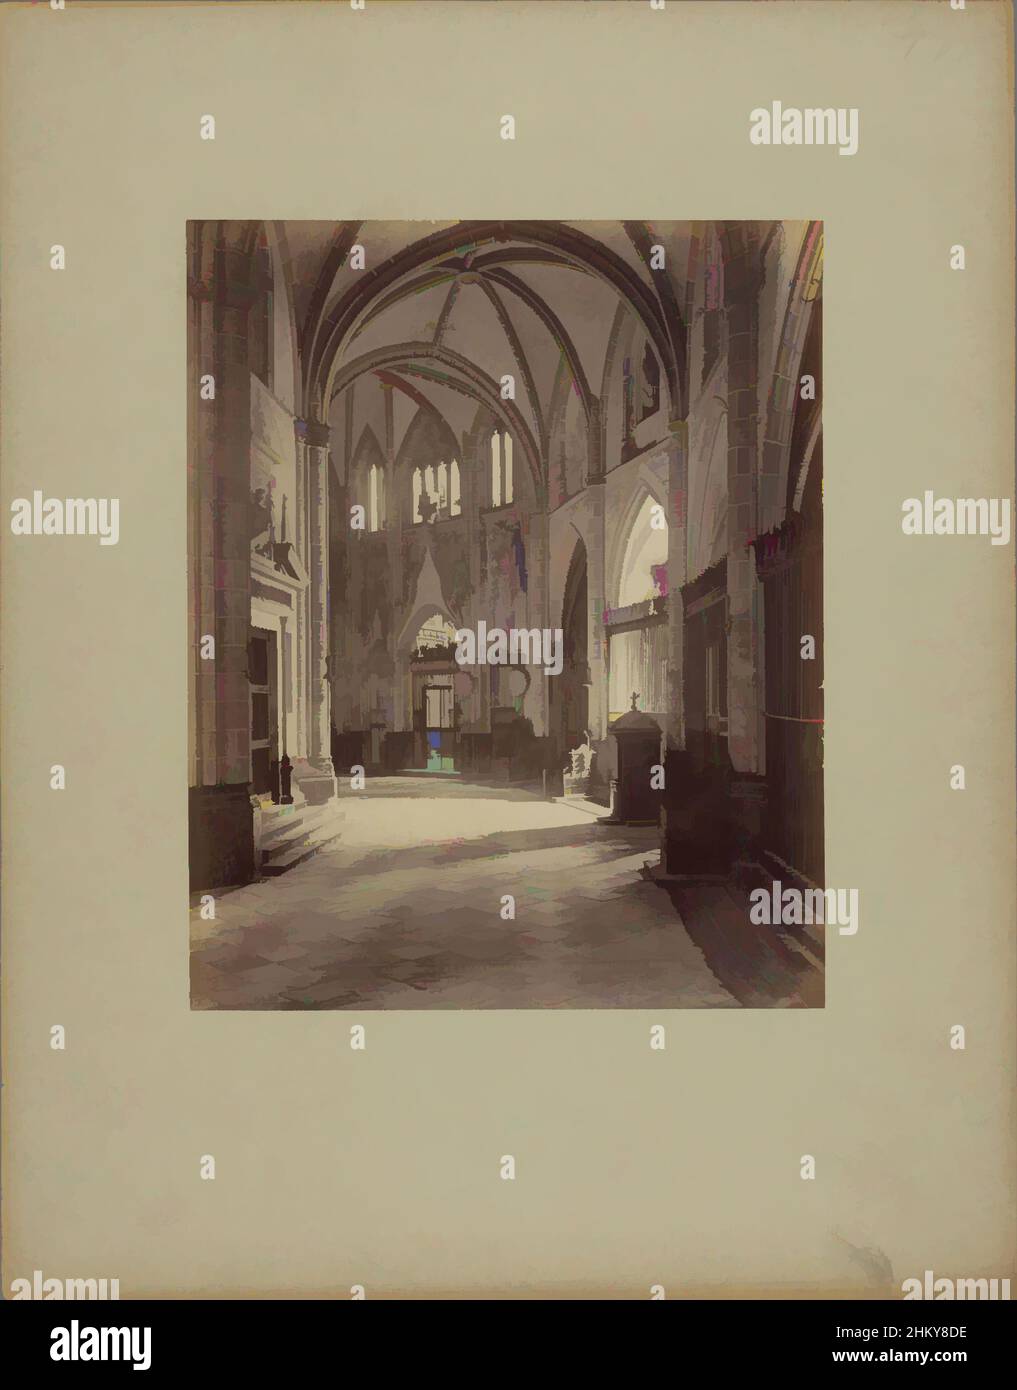 Art inspired by Vault with ribs coming together in a star shape in the cathedral at Burgos, Burgos. - Int. de la Cathédrale [(...), Kathedraal van Burgos, c. 1875 - c. 1900, cardboard, albumen print, height 285 mm × width 225 mm, Classic works modernized by Artotop with a splash of modernity. Shapes, color and value, eye-catching visual impact on art. Emotions through freedom of artworks in a contemporary way. A timeless message pursuing a wildly creative new direction. Artists turning to the digital medium and creating the Artotop NFT Stock Photo